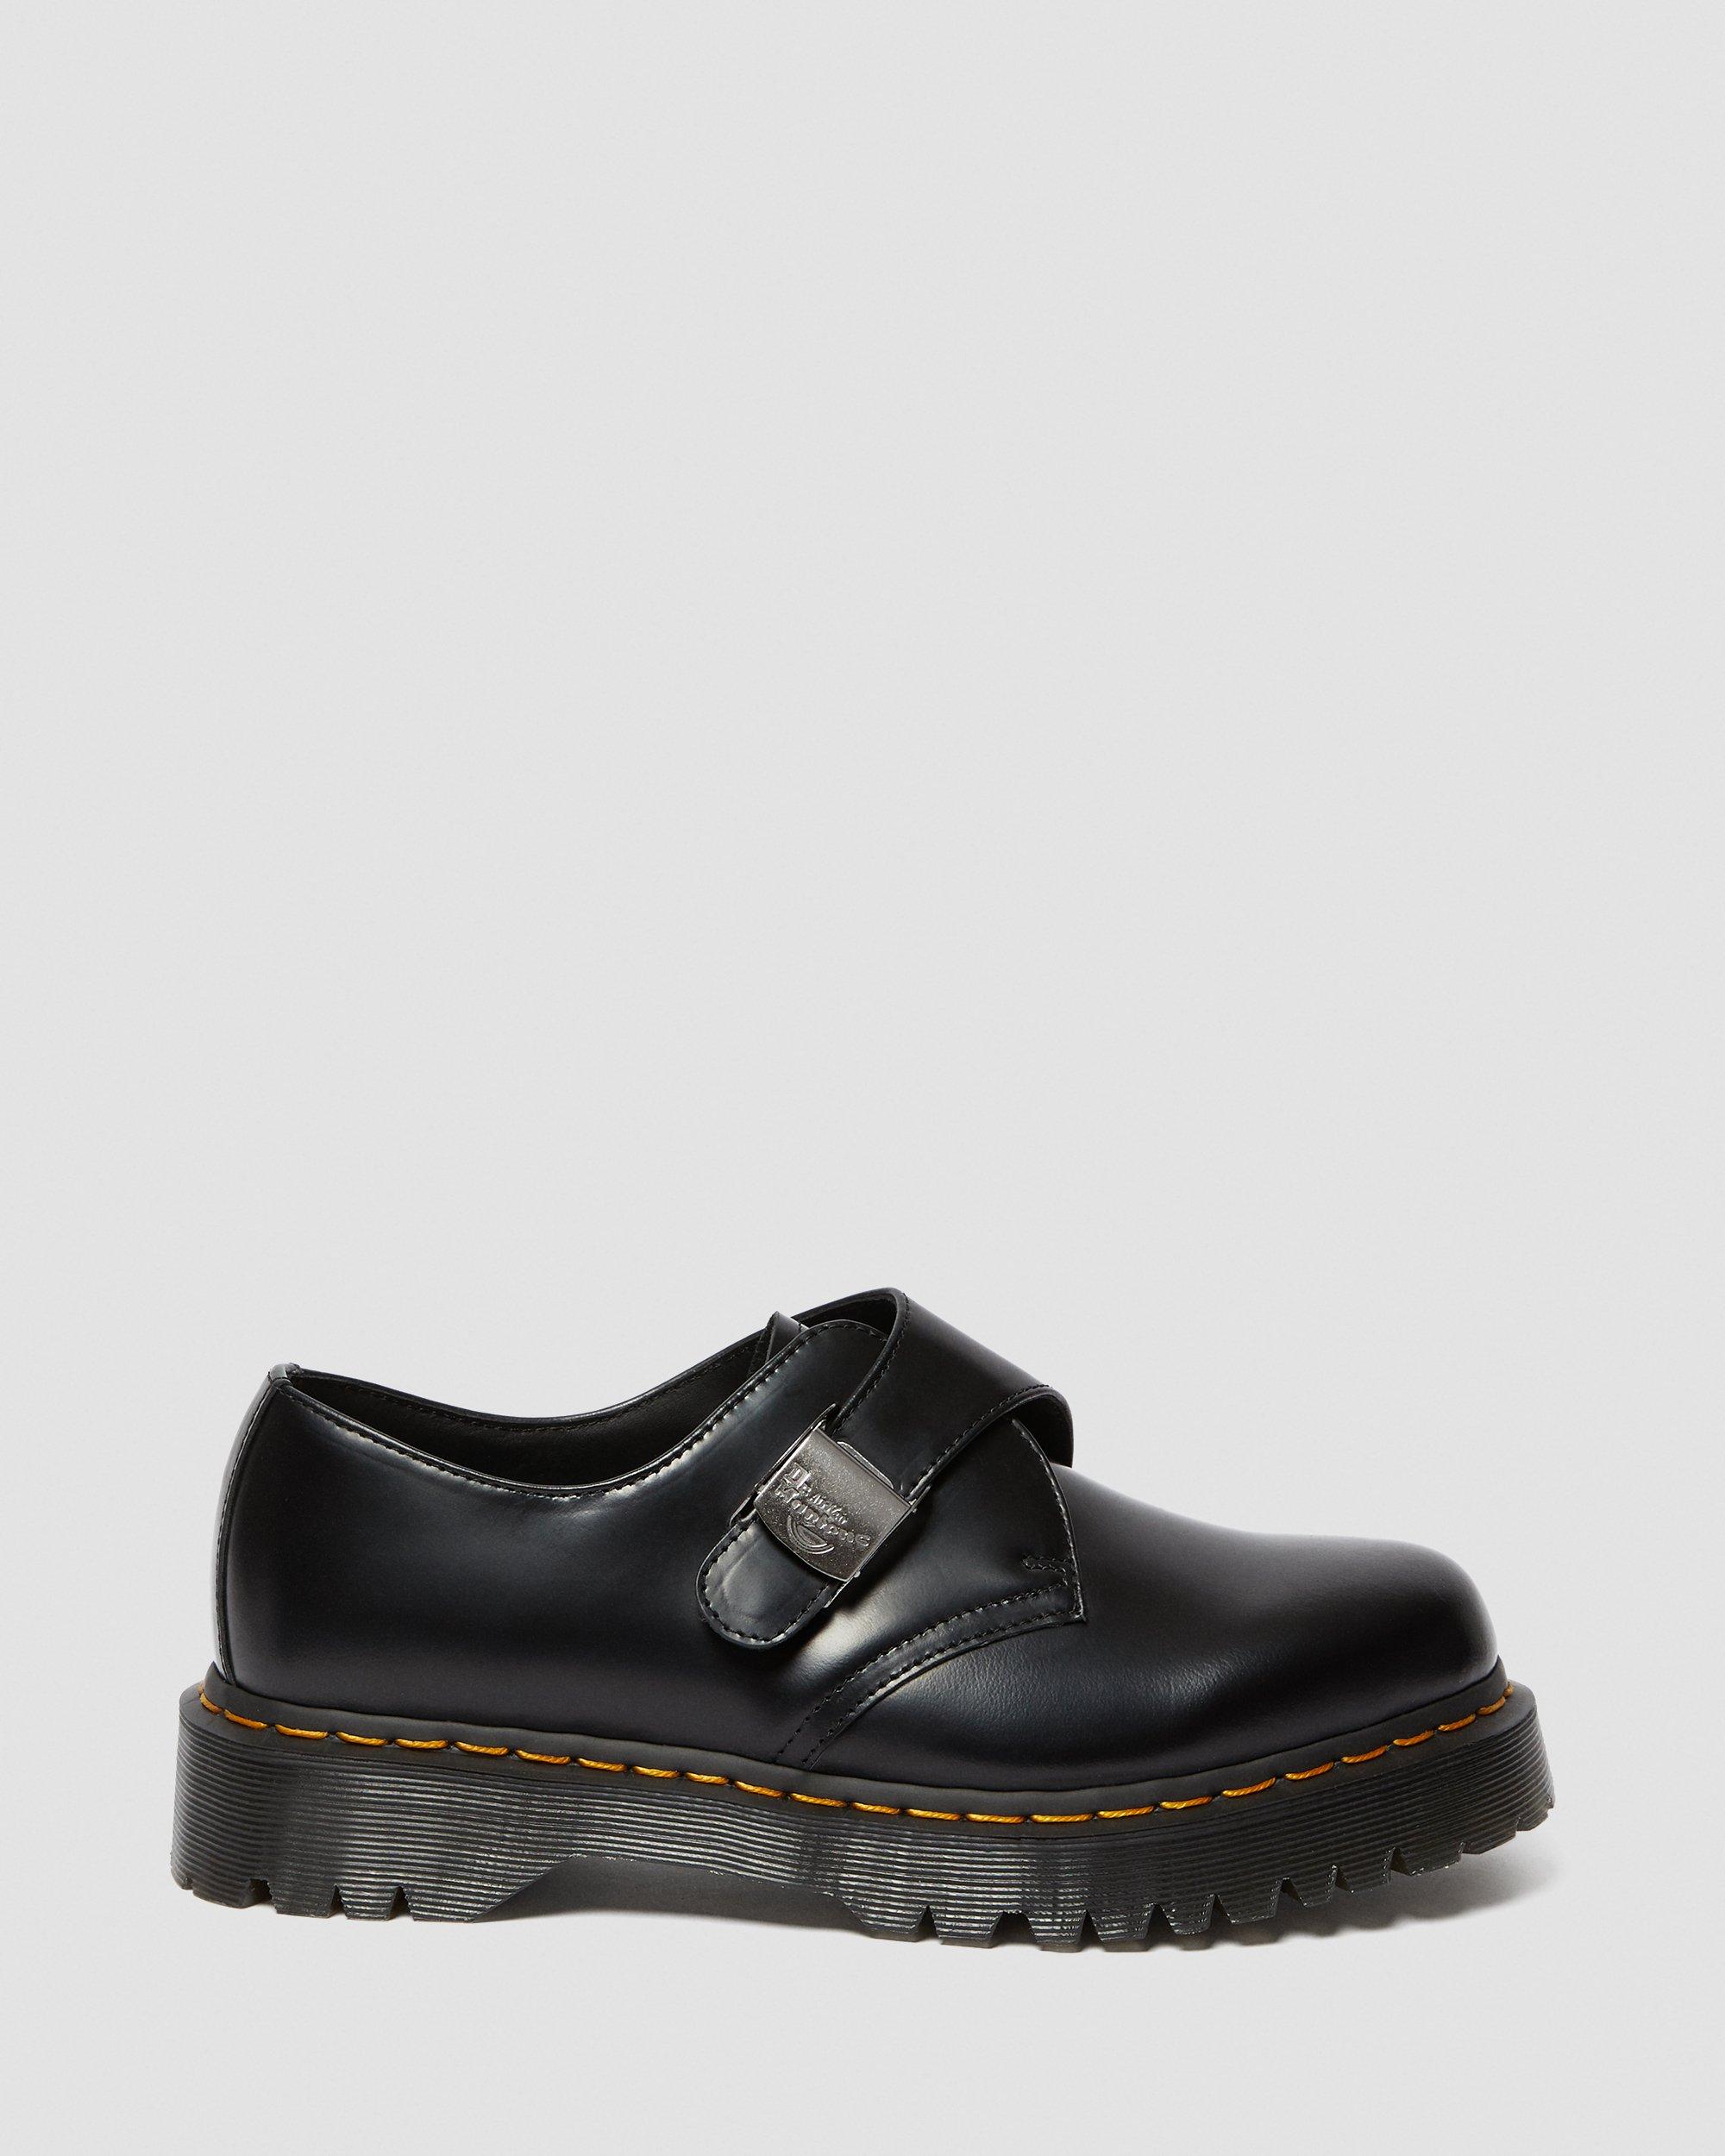 FENIMORE LOW LEATHER SHOES | Dr. Martens